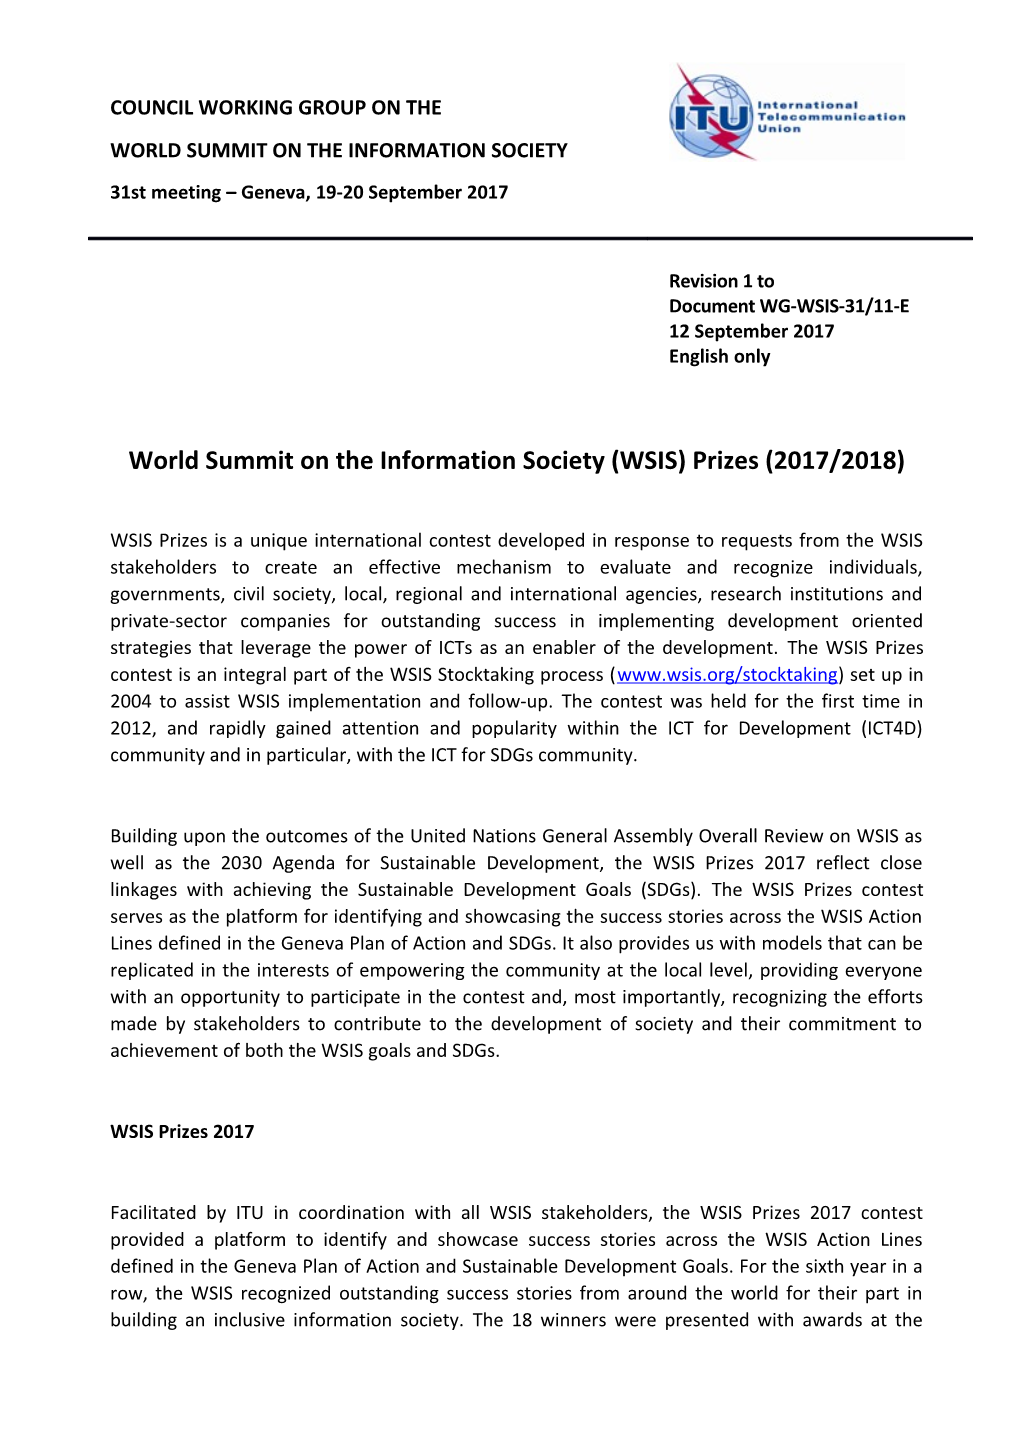 World Summit on the Information Society (WSIS) Prizes (2017/2018)